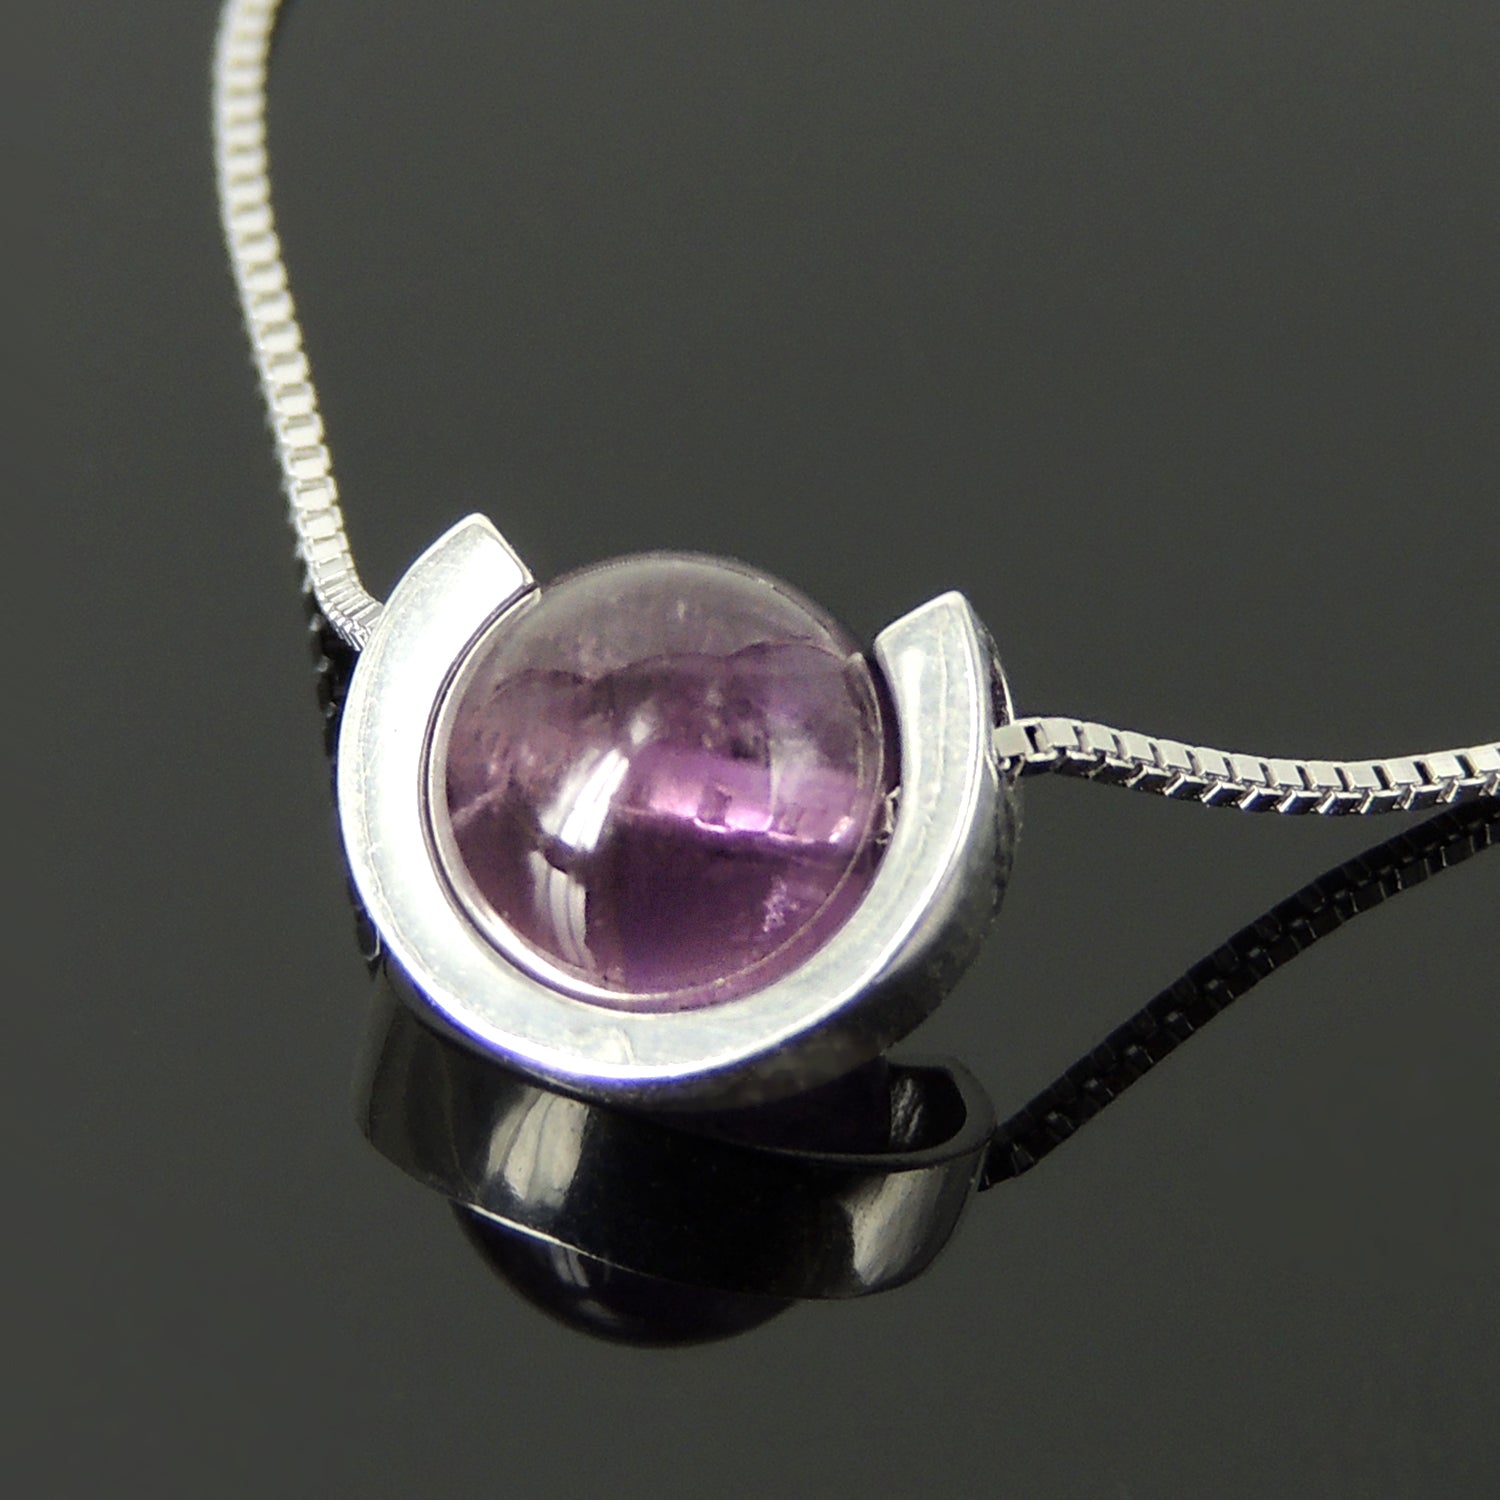 Natural Amethyst Gemstone Necklace - Handmade Minimal Aesthetic, February Birthstone, Genuine 925 Sterling Silver Moon Cradle Pendant and Small Box Chain